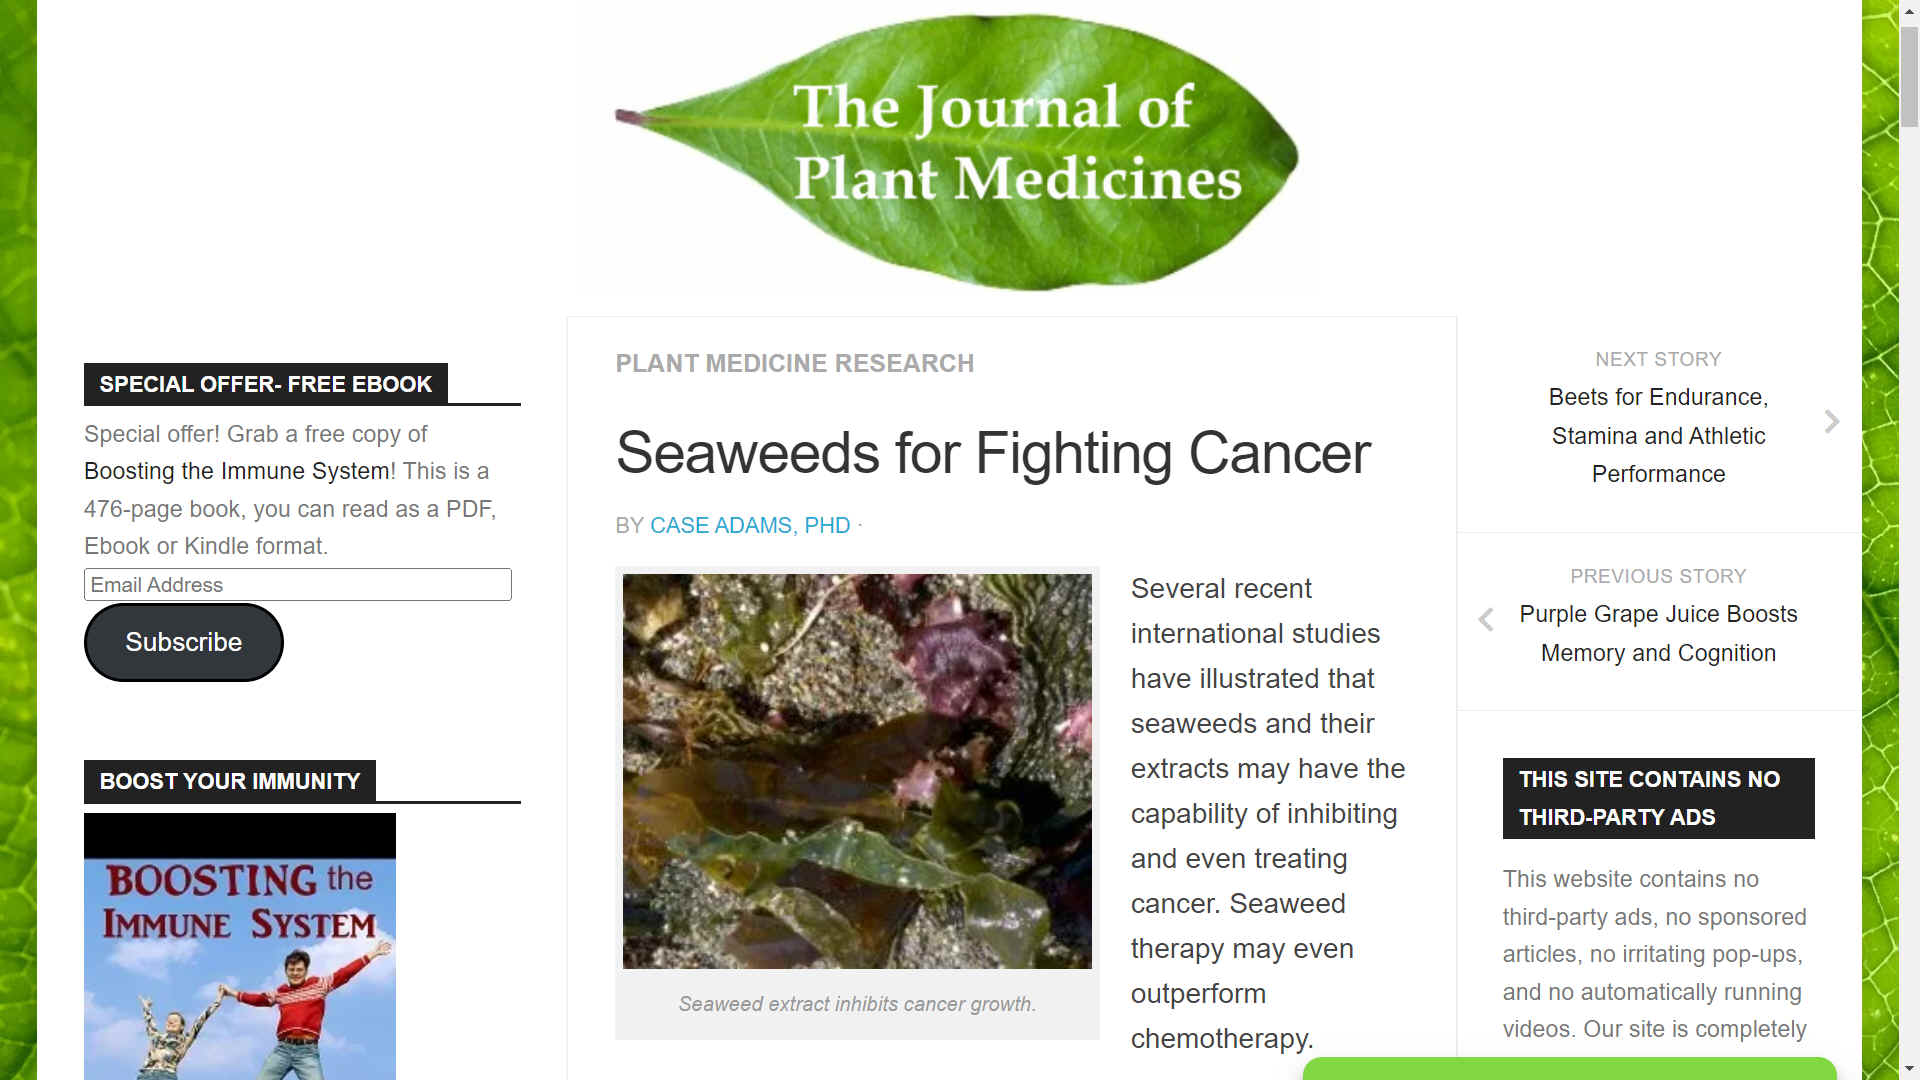 The Journal of Plant Medicines - Seaweeds for fighting cancer